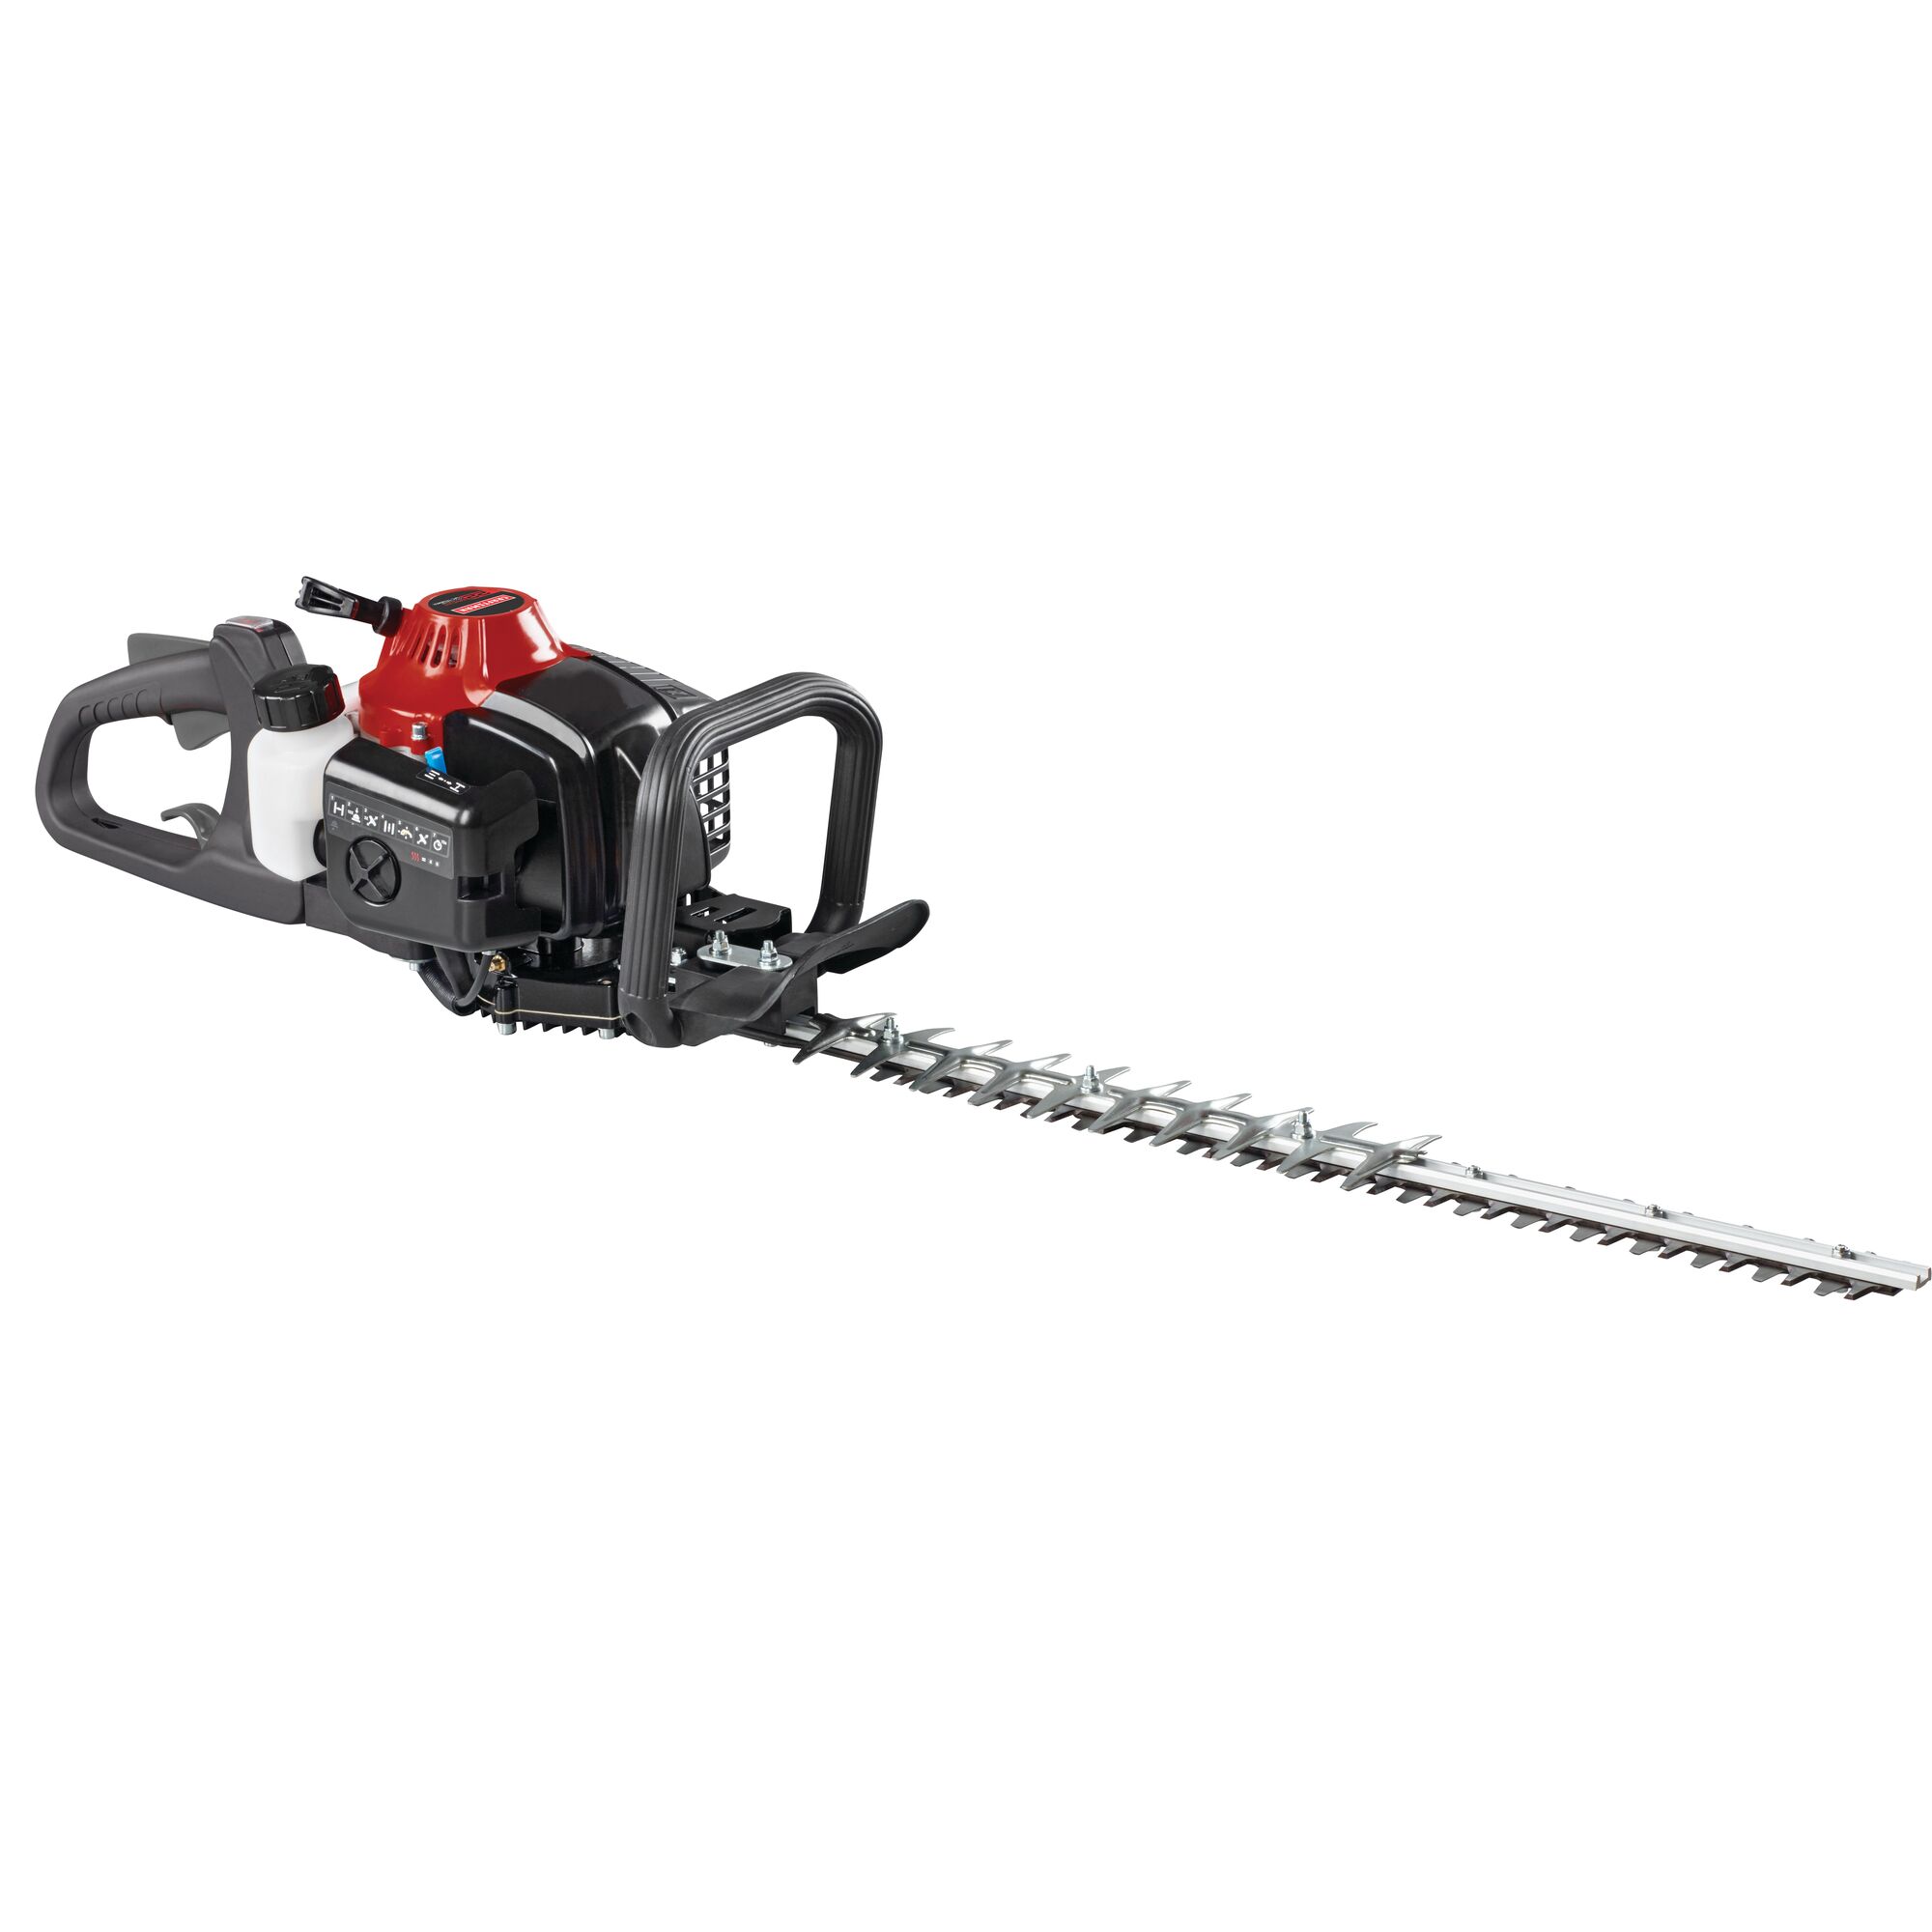 Left profile of 22 inch 2 cycle gas hedge trimmer.